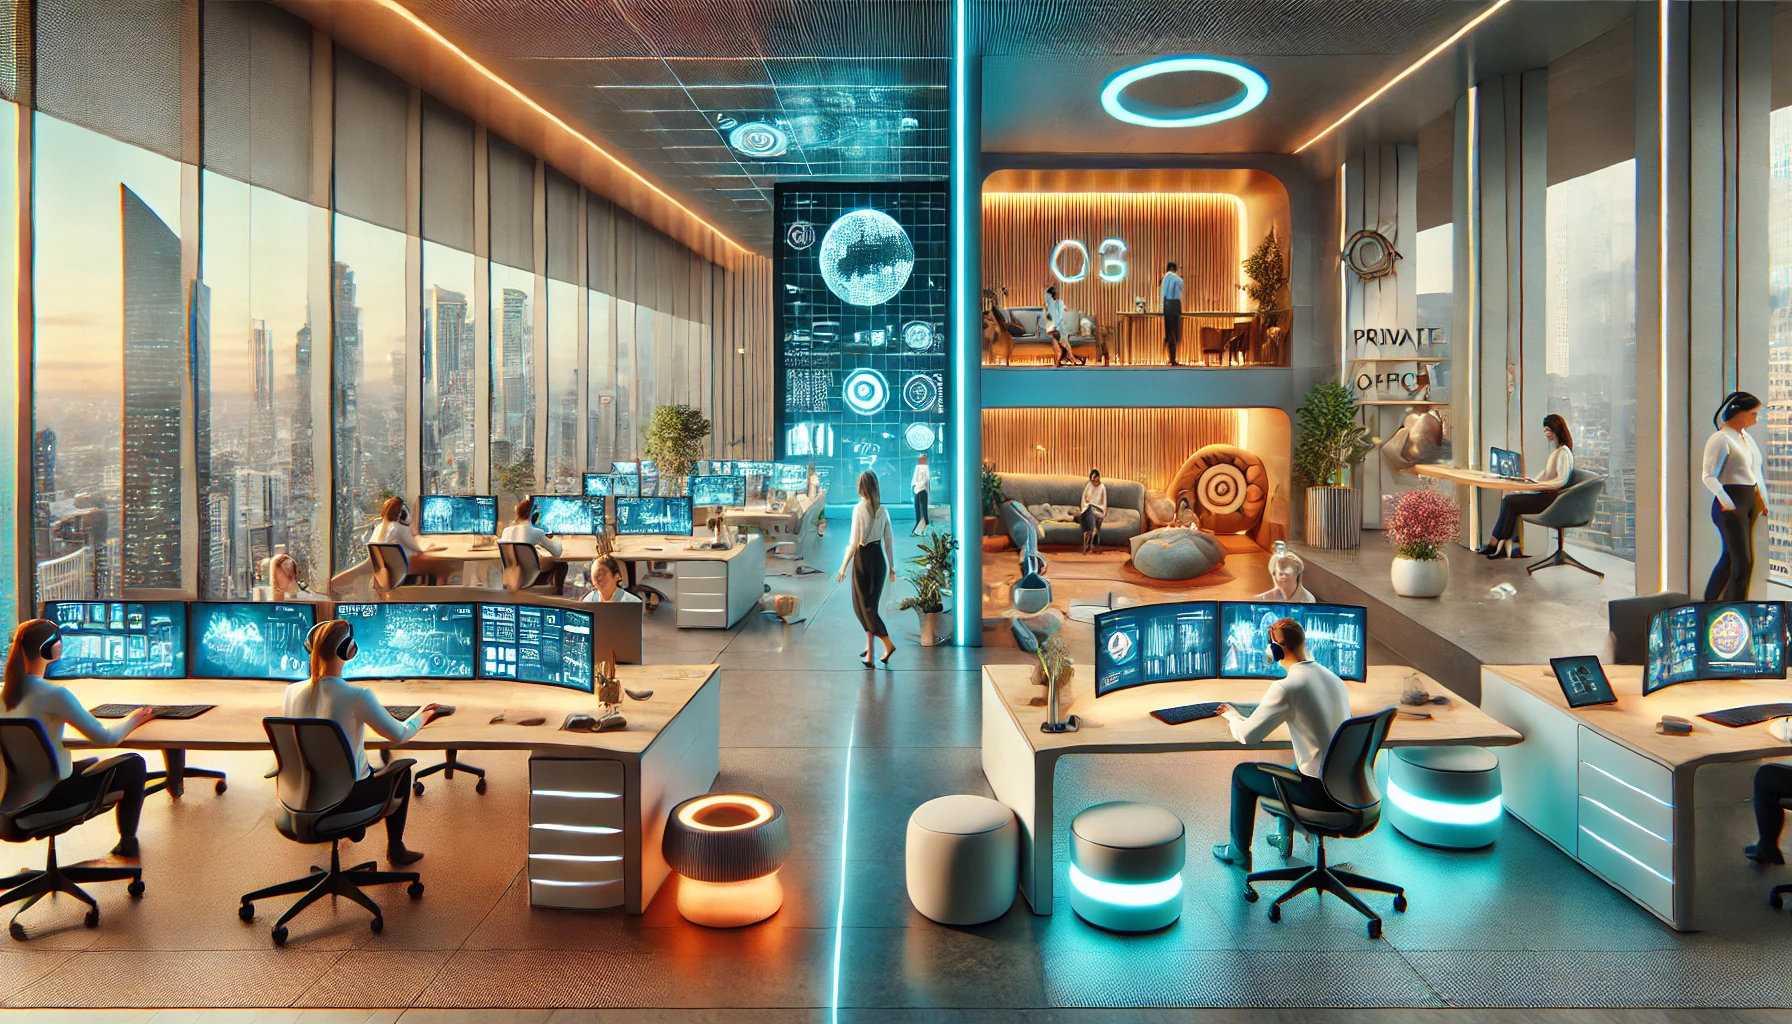 A futuristic office split into work and play zones. Work zone: employees at holographic displays with AI assistants. Play zone: holographic gaming, AI massage chairs, and a mindfulness room.